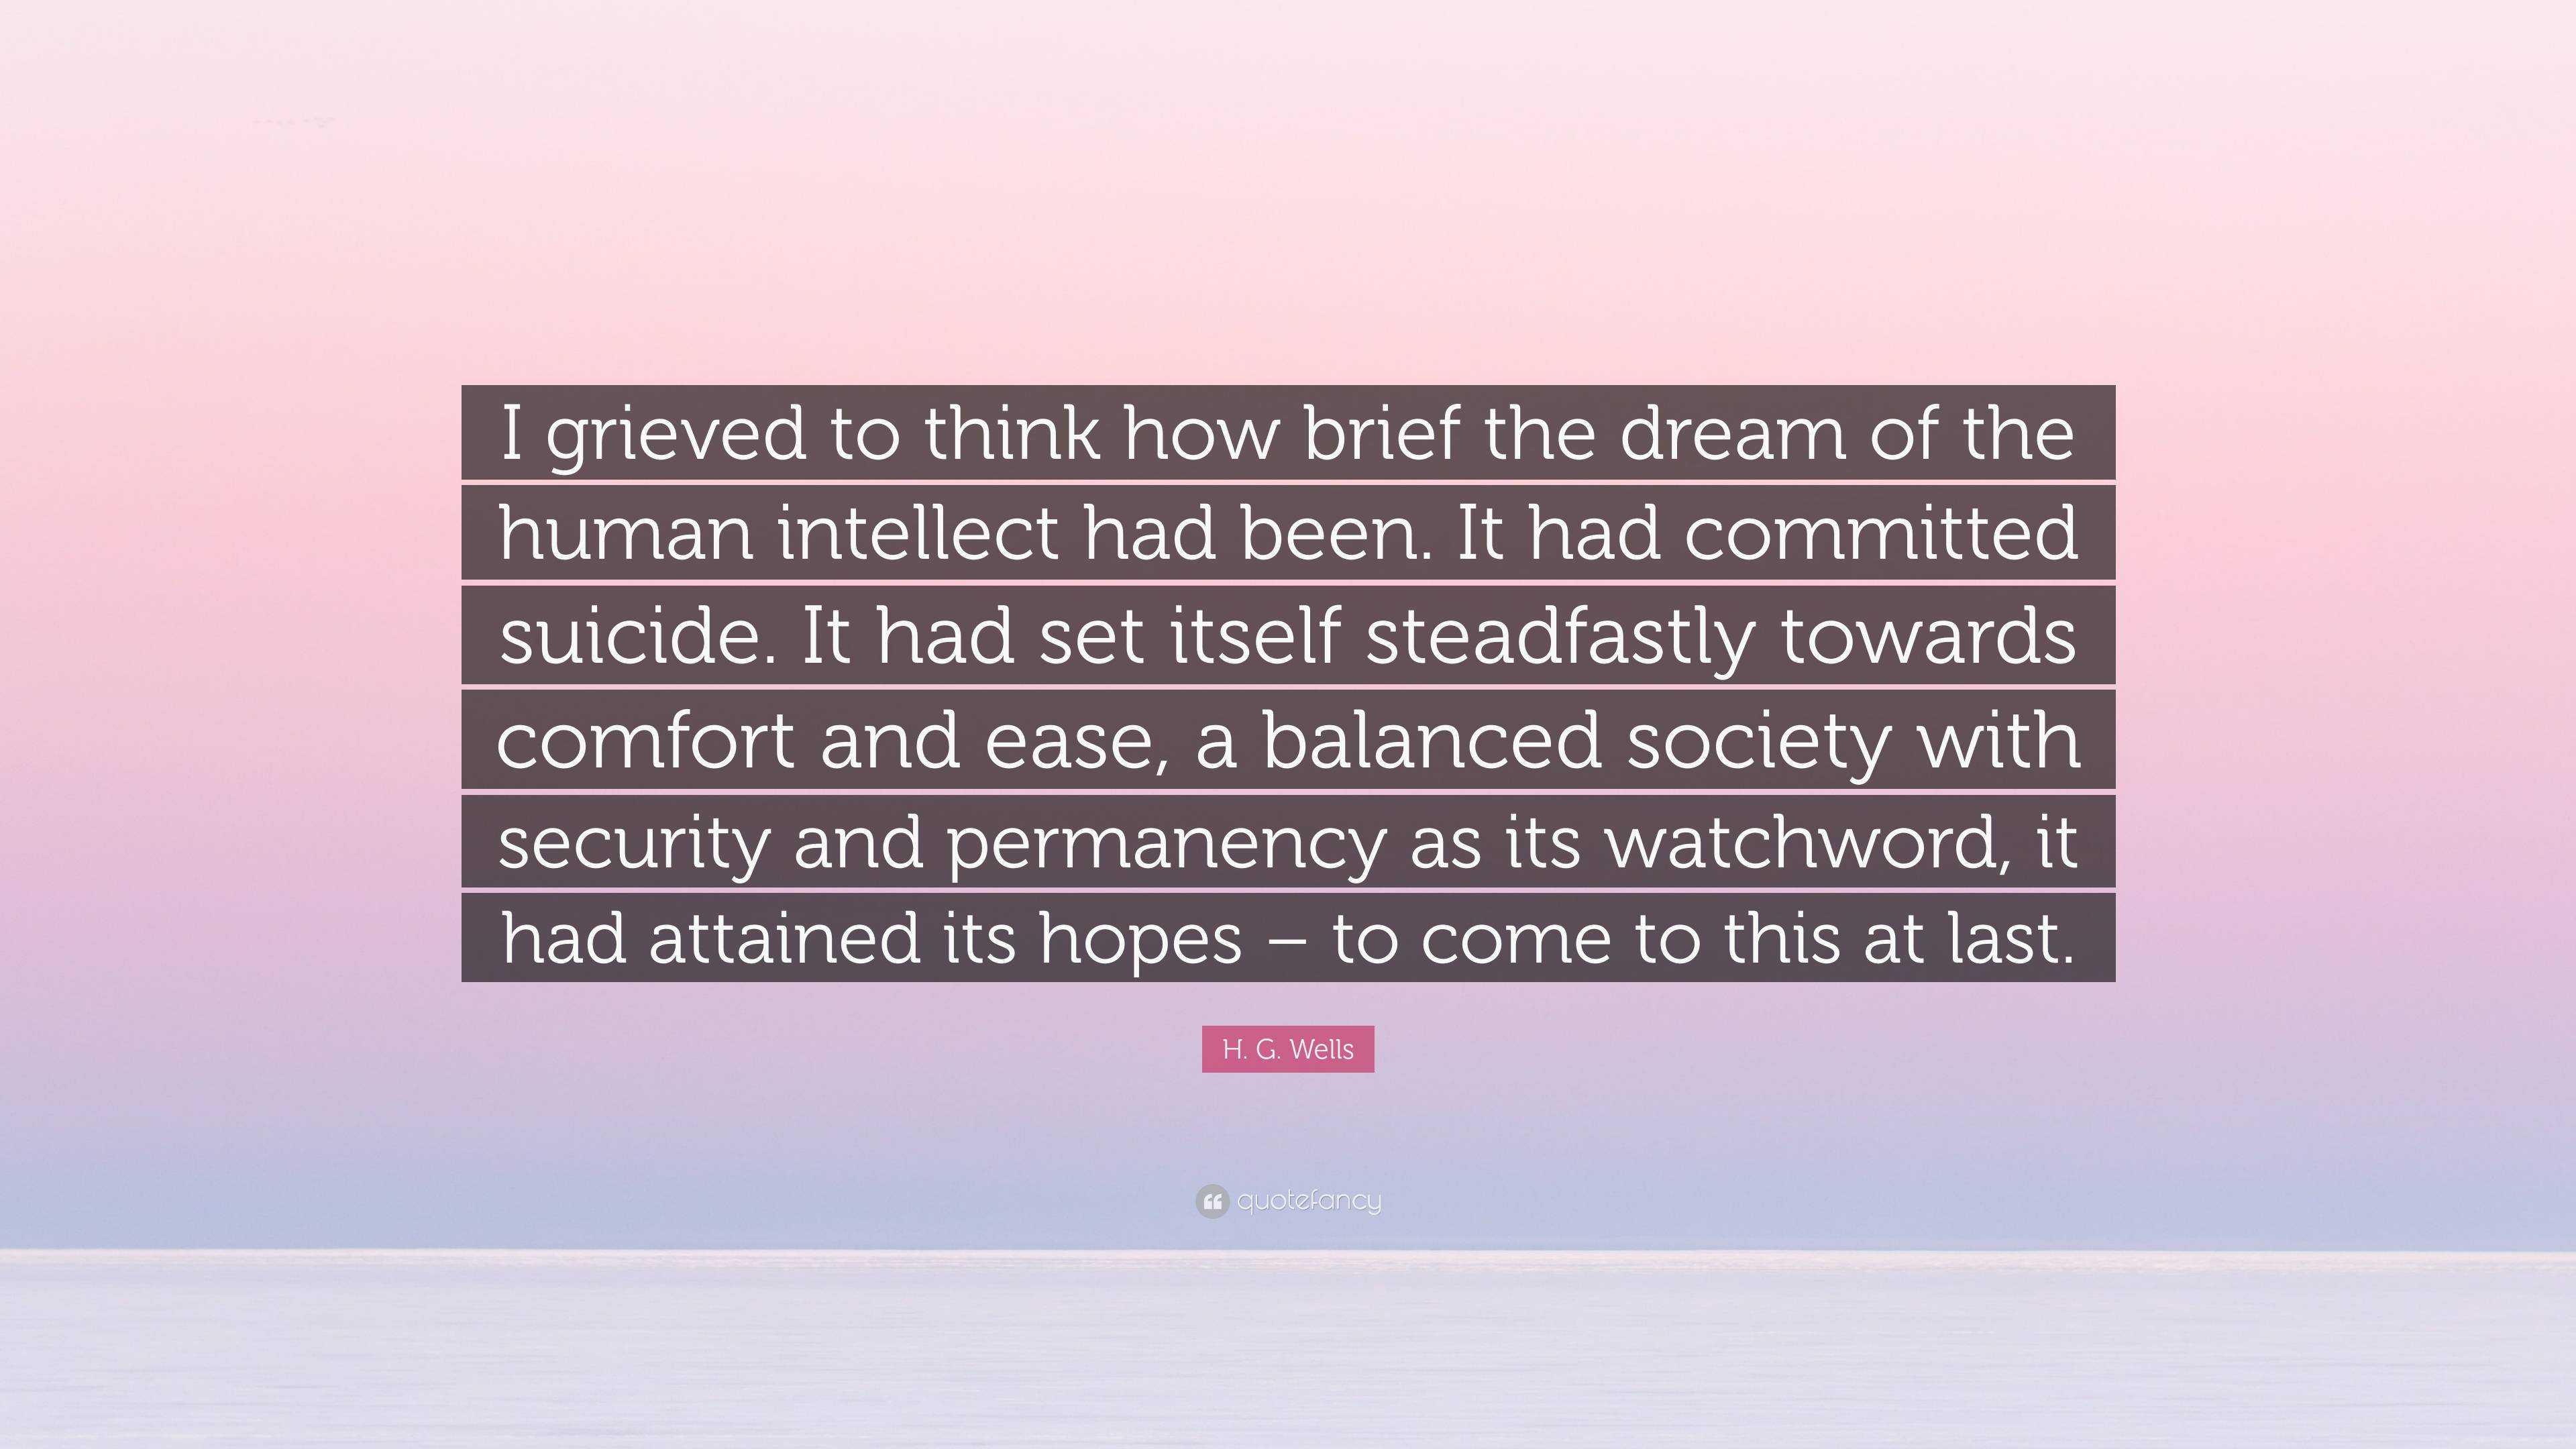 H. G. Wells Quote: “I grieved to think how brief the dream of the human  intellect had been. It had committed suicide. It had set itself stea”